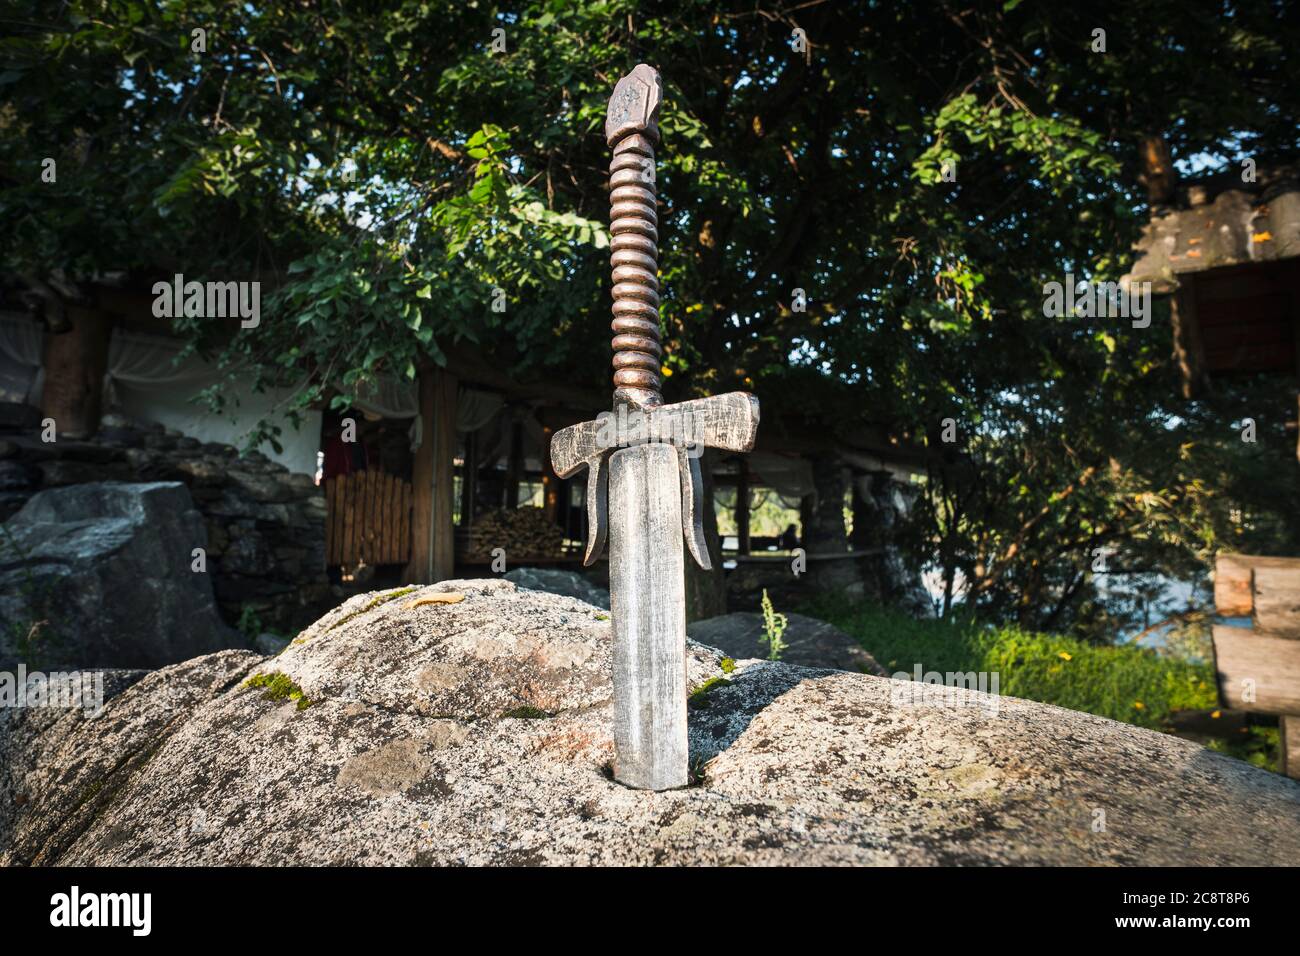 Excalibur, King Arthur's sword in stone. Edged weapons from the legend Pro king Arthur. Stock Photo